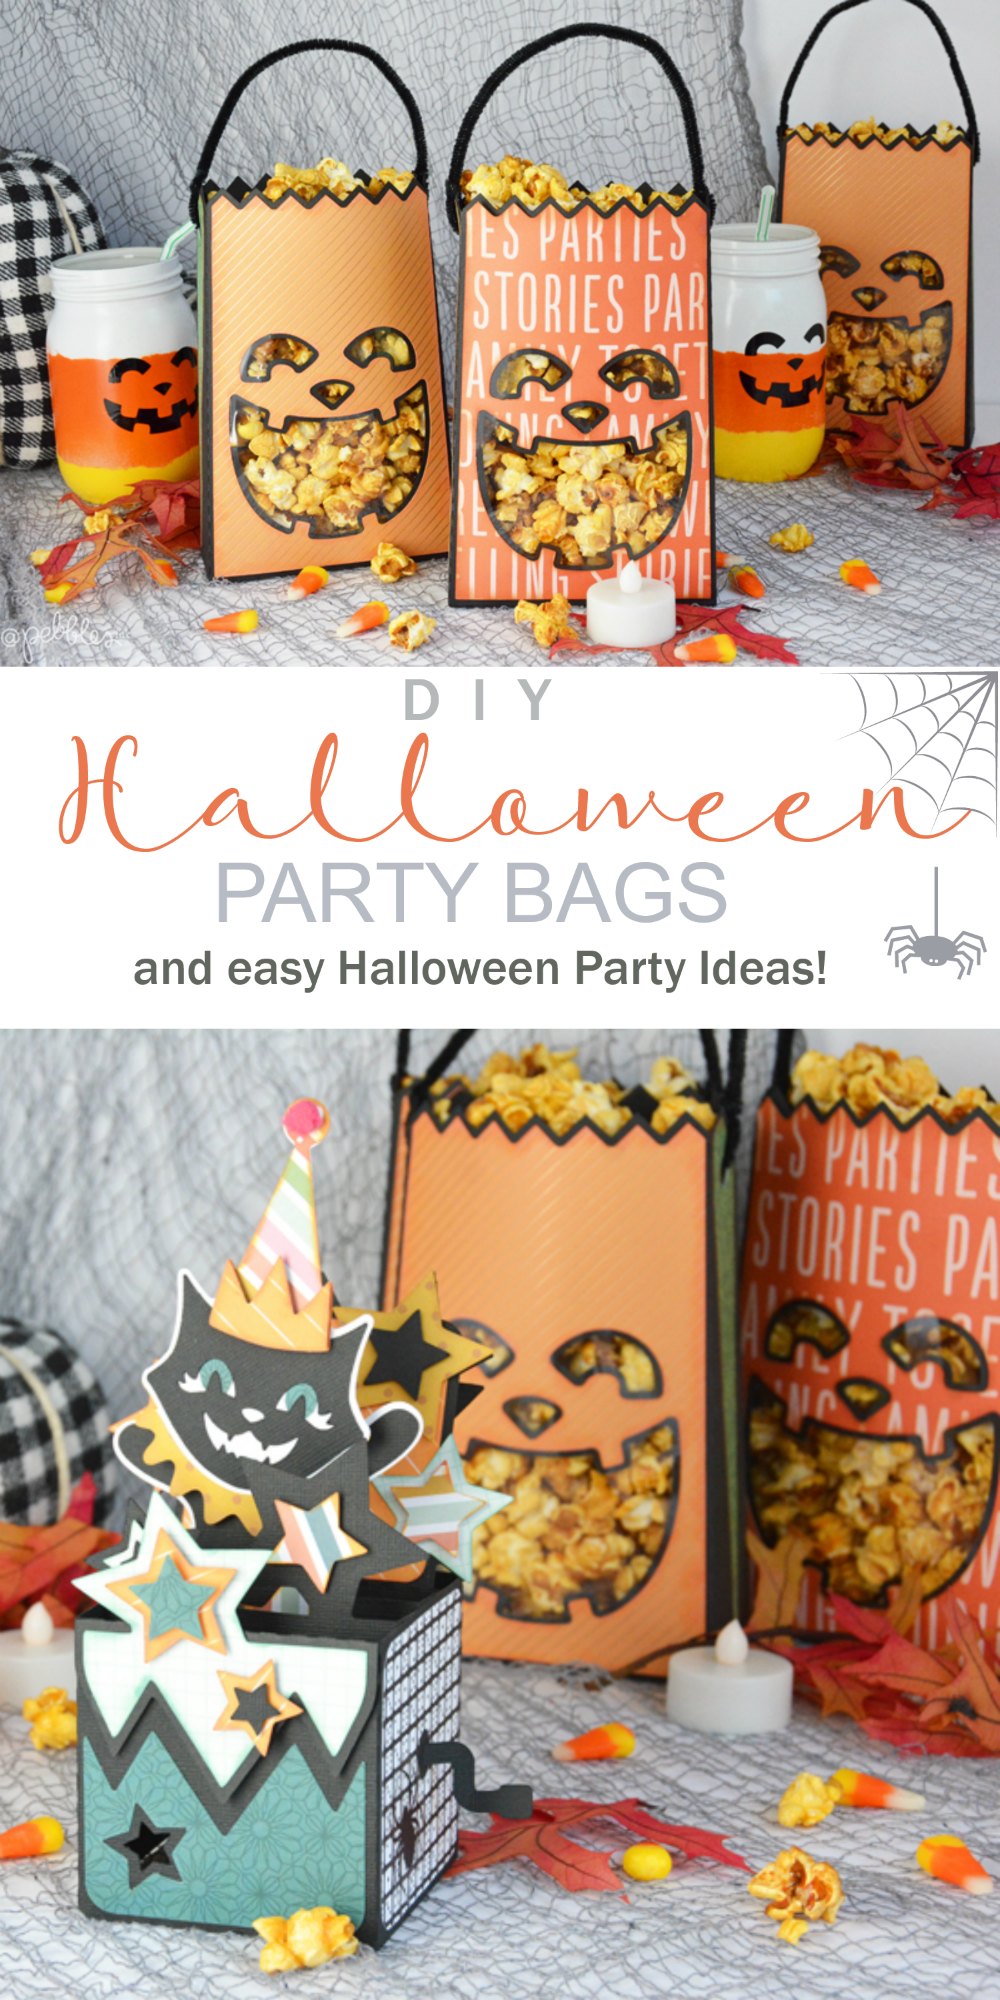 Halloween Pumpkin Paper Party Bags. Turn sheet of paper into festive pumpkin-shaped Halloween party bags and fill them with treats. Plus easy Halloween Party Ideas! 